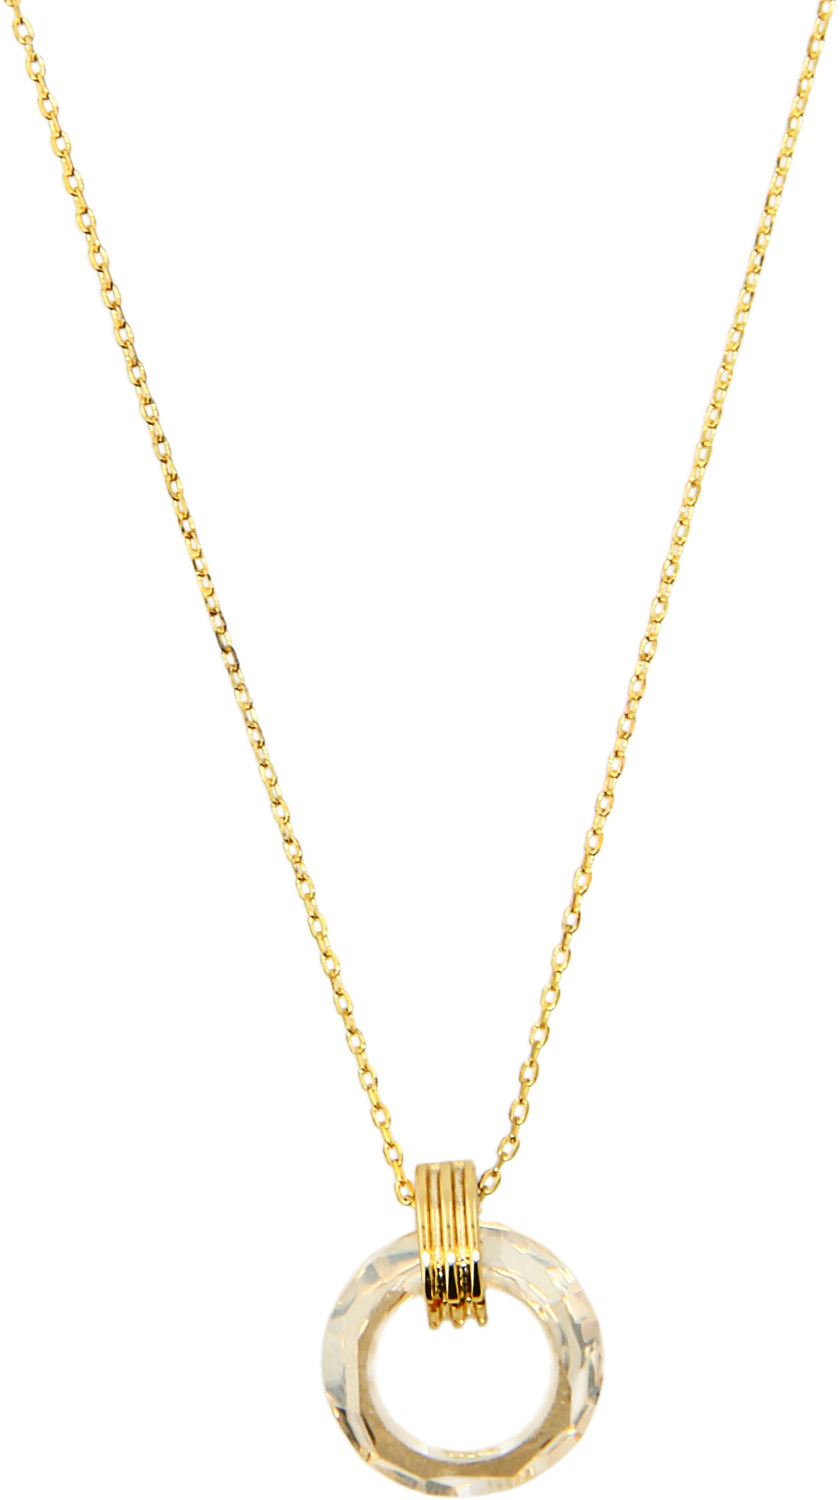 Crystal Golden Shadow Cosmic by H2Z Made with Swarovski Elements - Crystal Golden Shadow Cosmic - Gold Plated Austrian Element Necklace